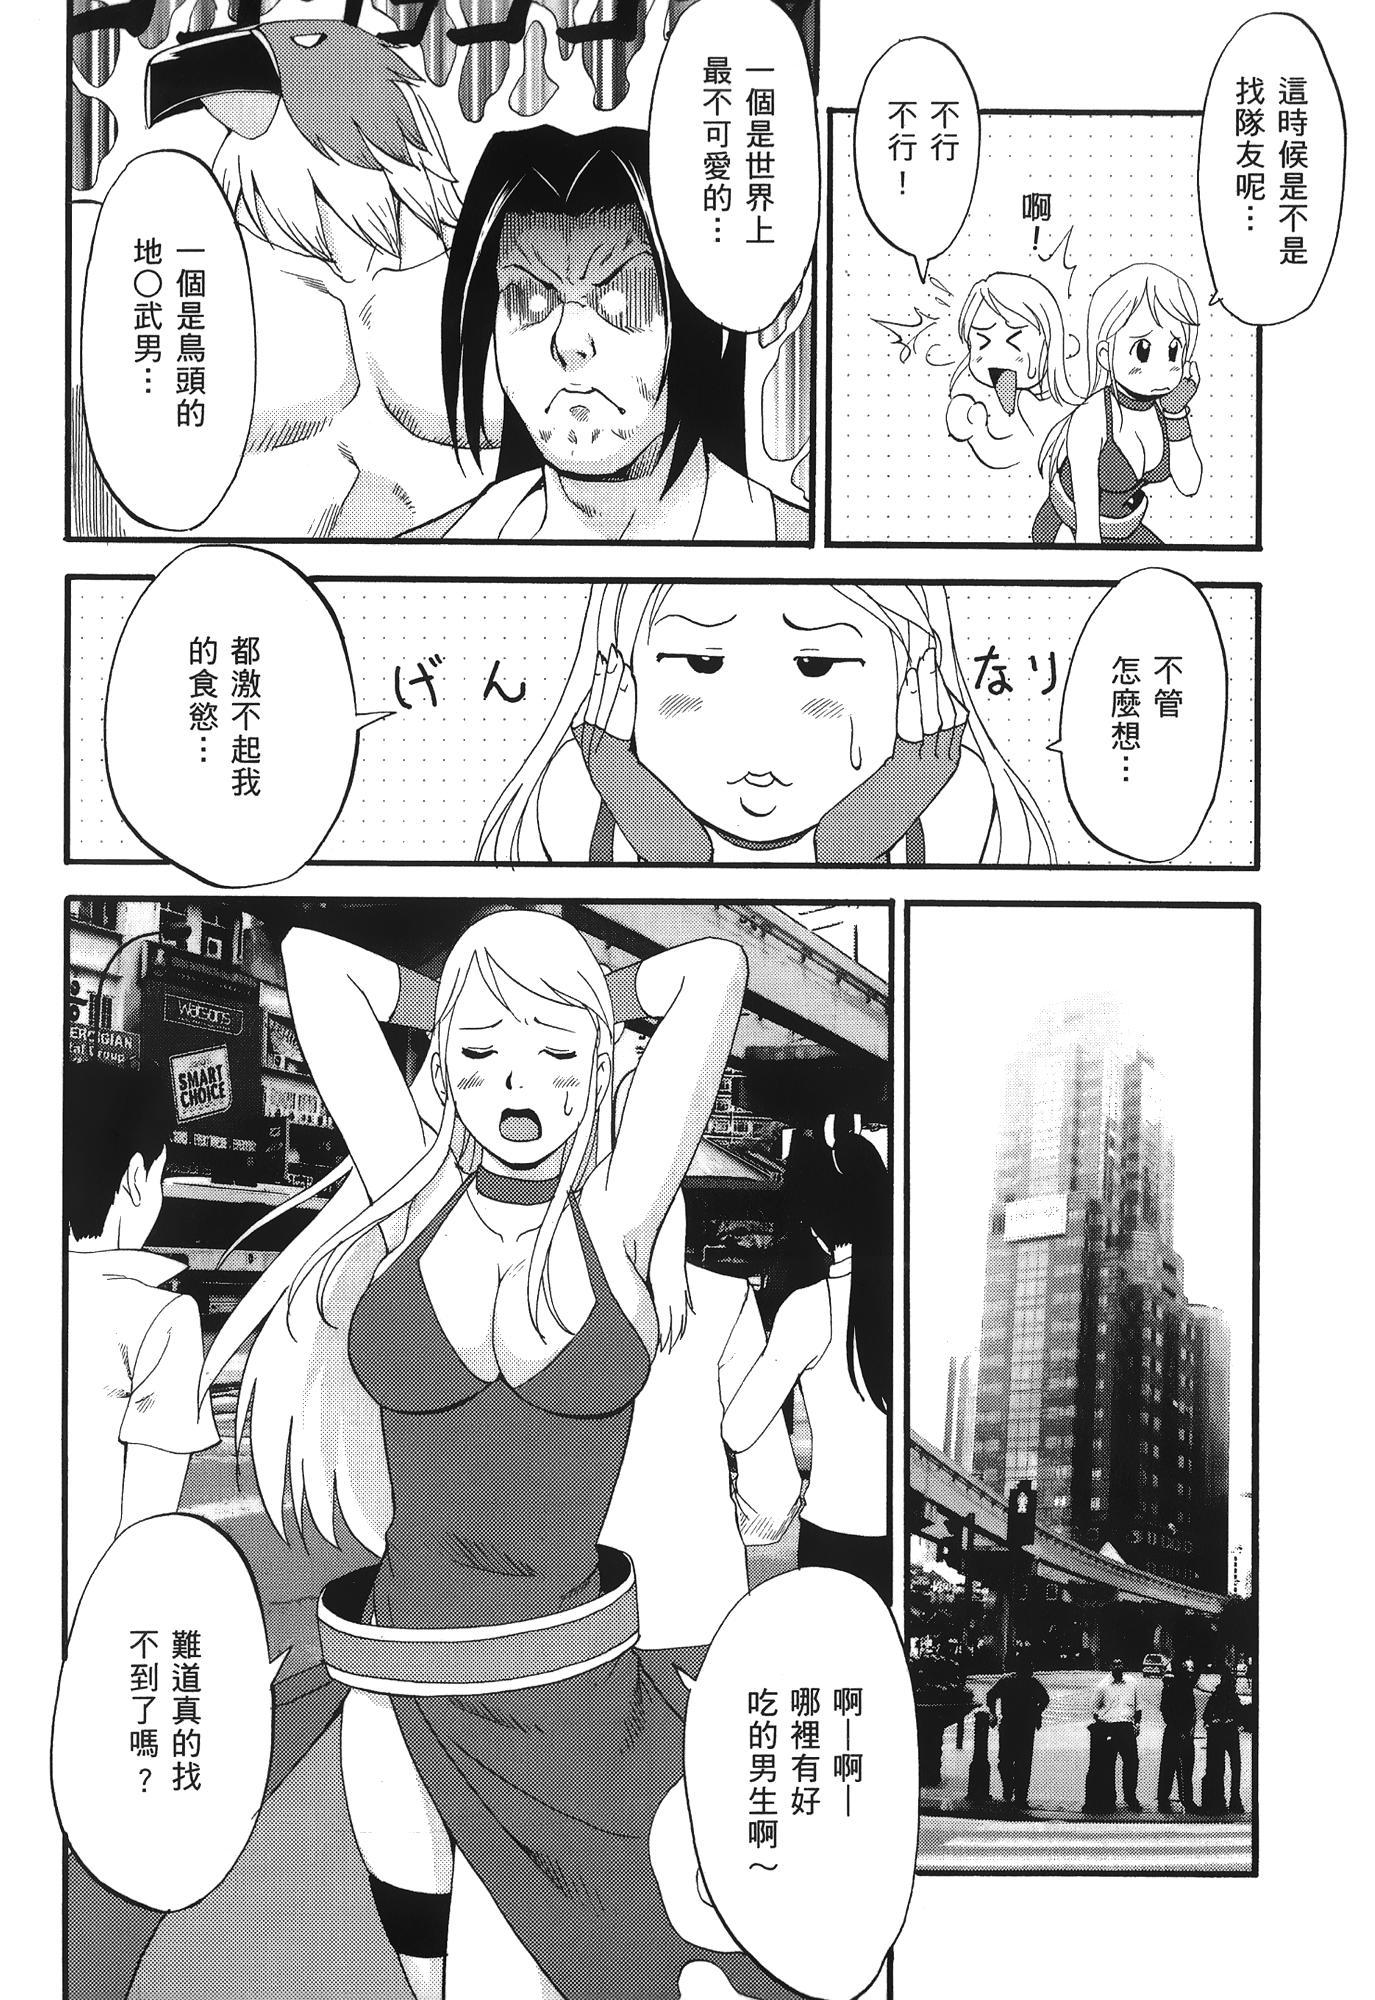 Sesso [Saigado] THE YURI & FRIENDS 6 (King of Fighters) | 武鬥美少女 [Chinese] - King of fighters Mujer - Page 3